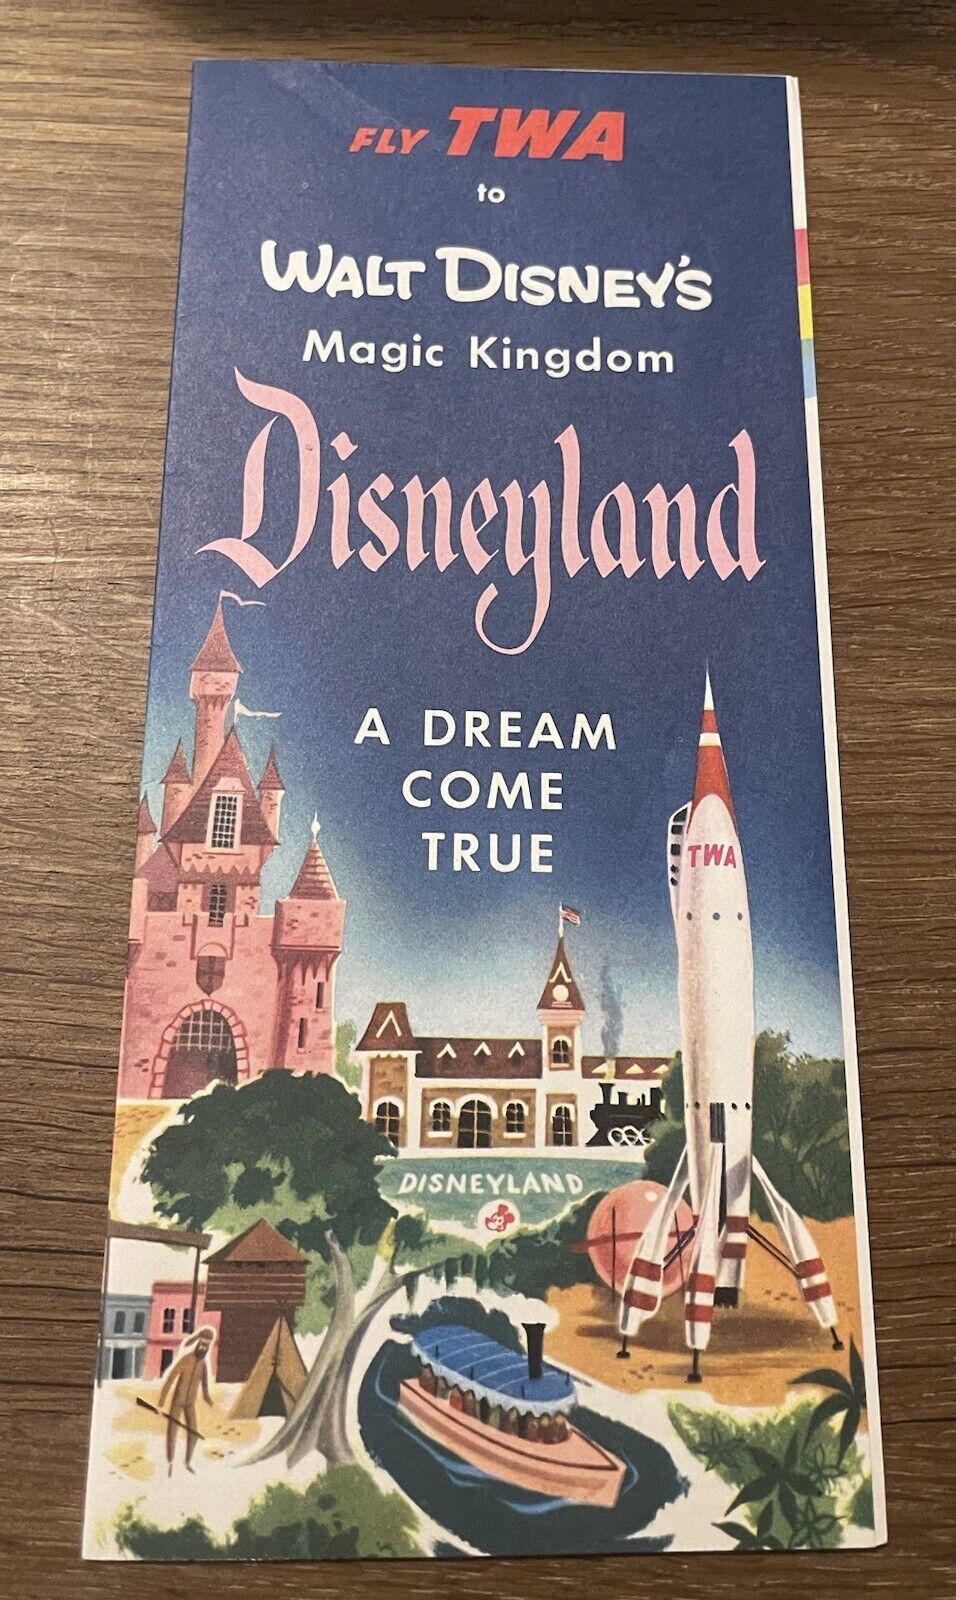 1955 Disneyland Booklet Fly Twa - A Dream Come True - Extremely Rare Condition